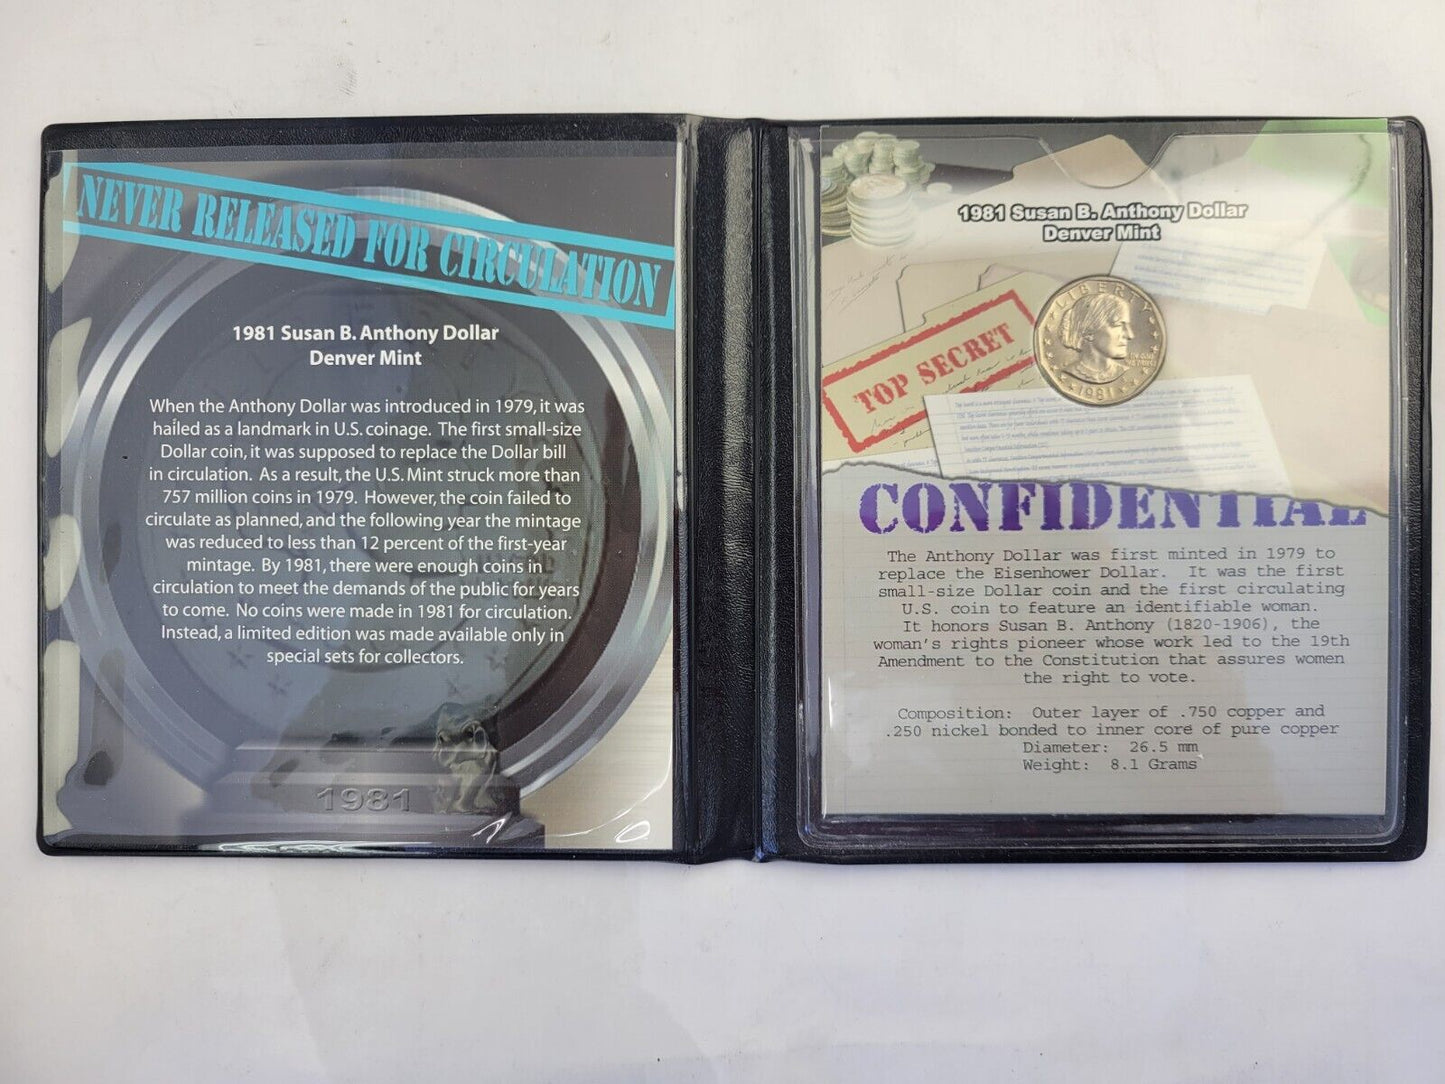 1981 D Susan B. Anthony $1 Dollar Never Released for Circulation Confidential